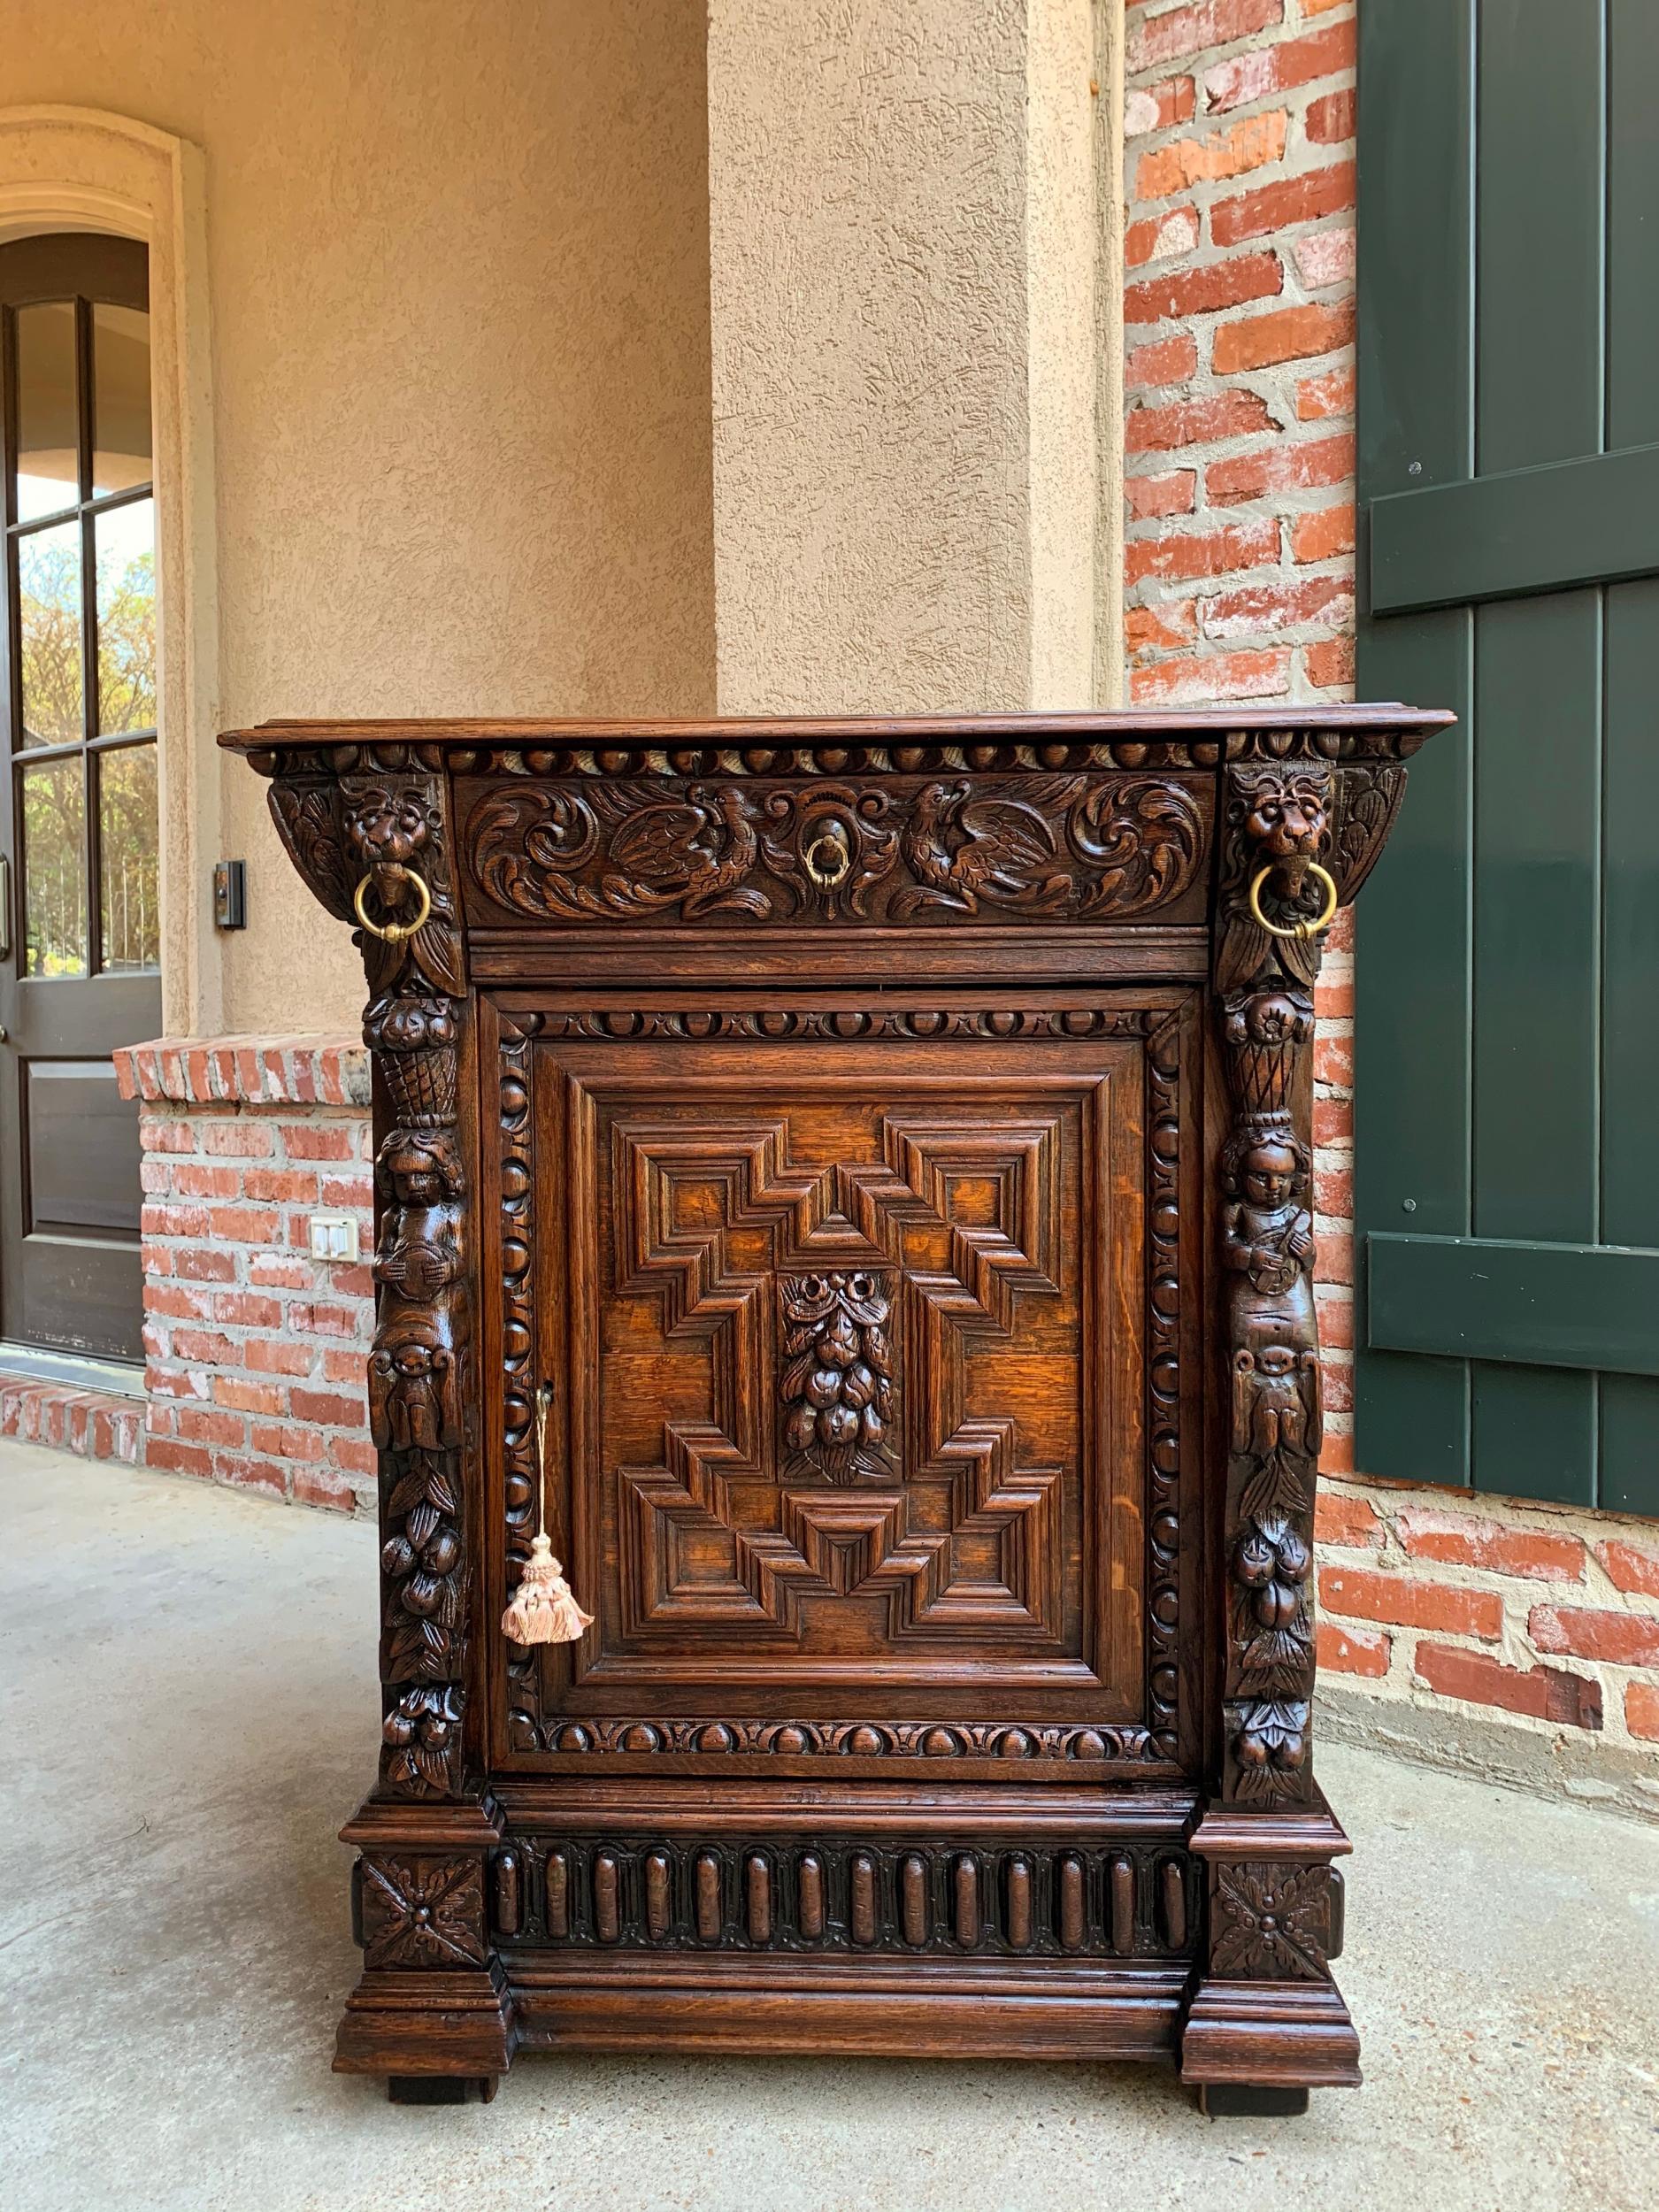 19th century French Confiturier jam cabinet carved oak renaissance wine bar

~Direct from France~
~Highly carved antique French “confiturier” or jam cabinet~
~These cabinets are one of your most requested antiques, as they have so many uses in